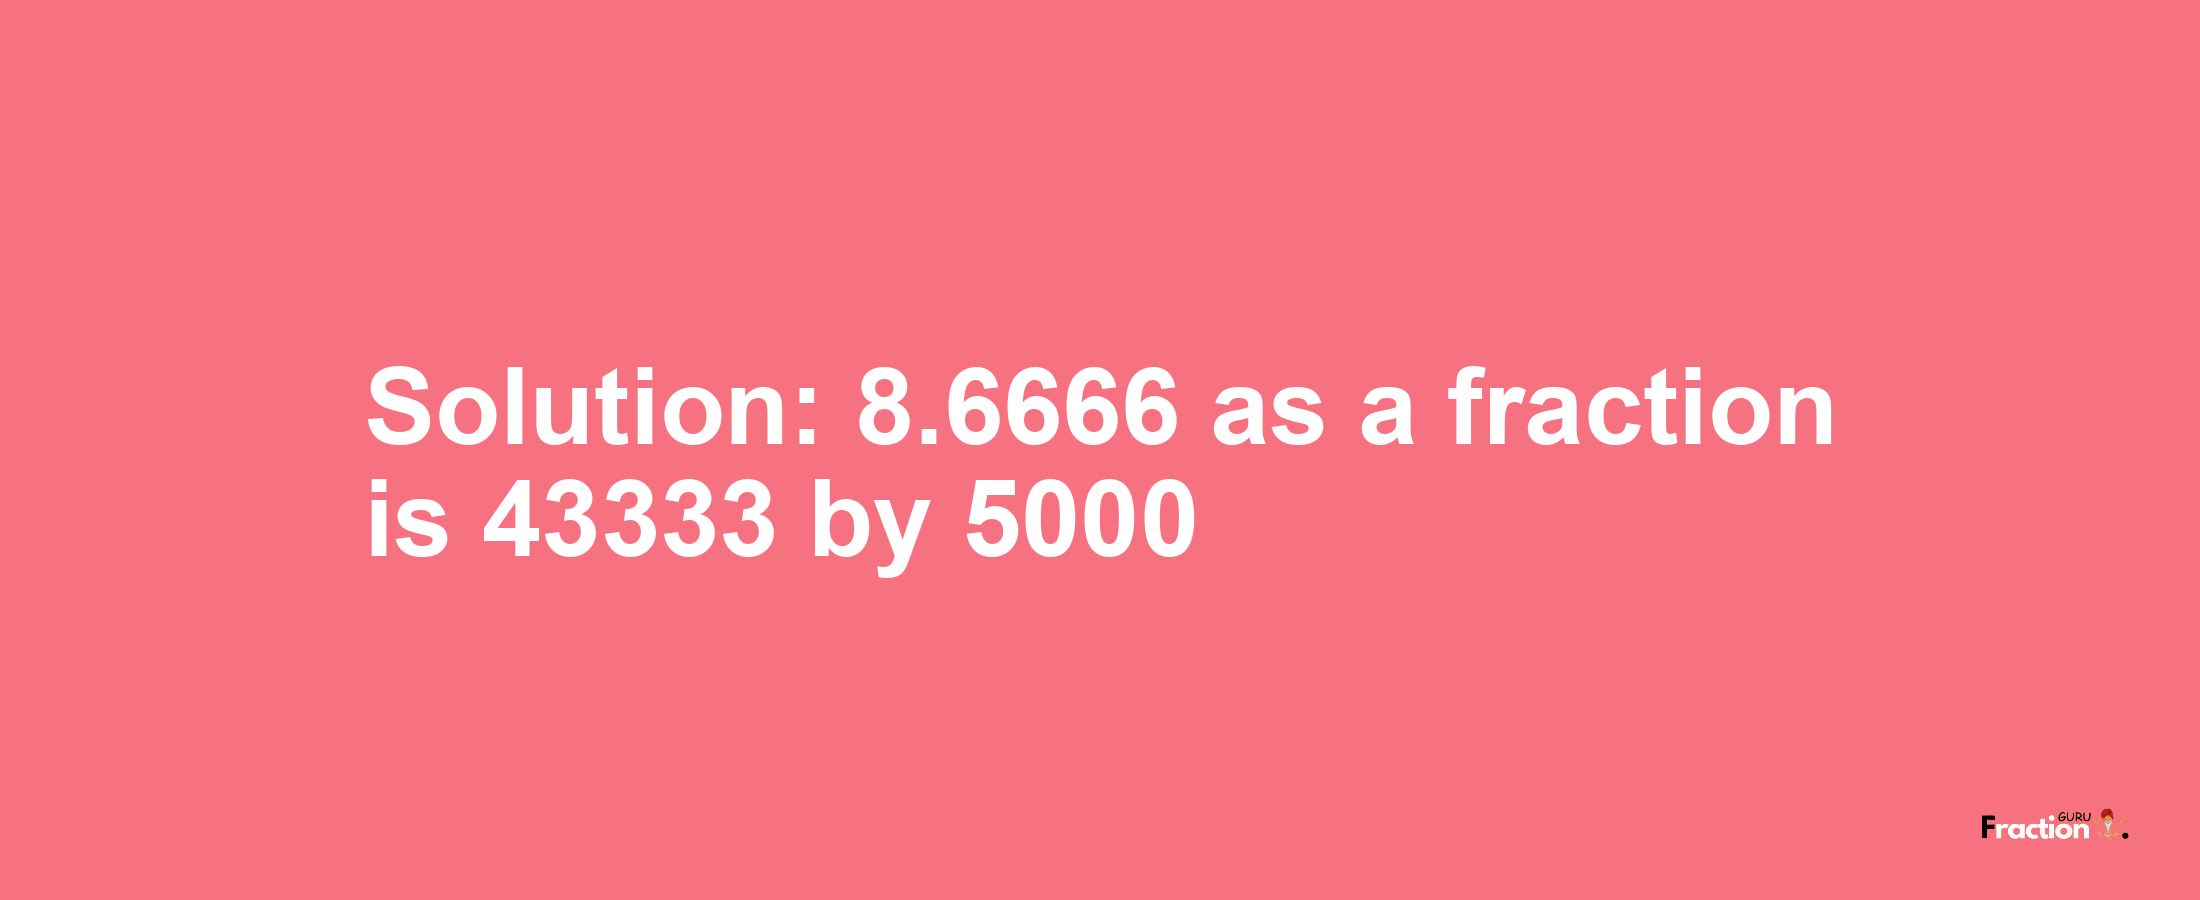 Solution:8.6666 as a fraction is 43333/5000